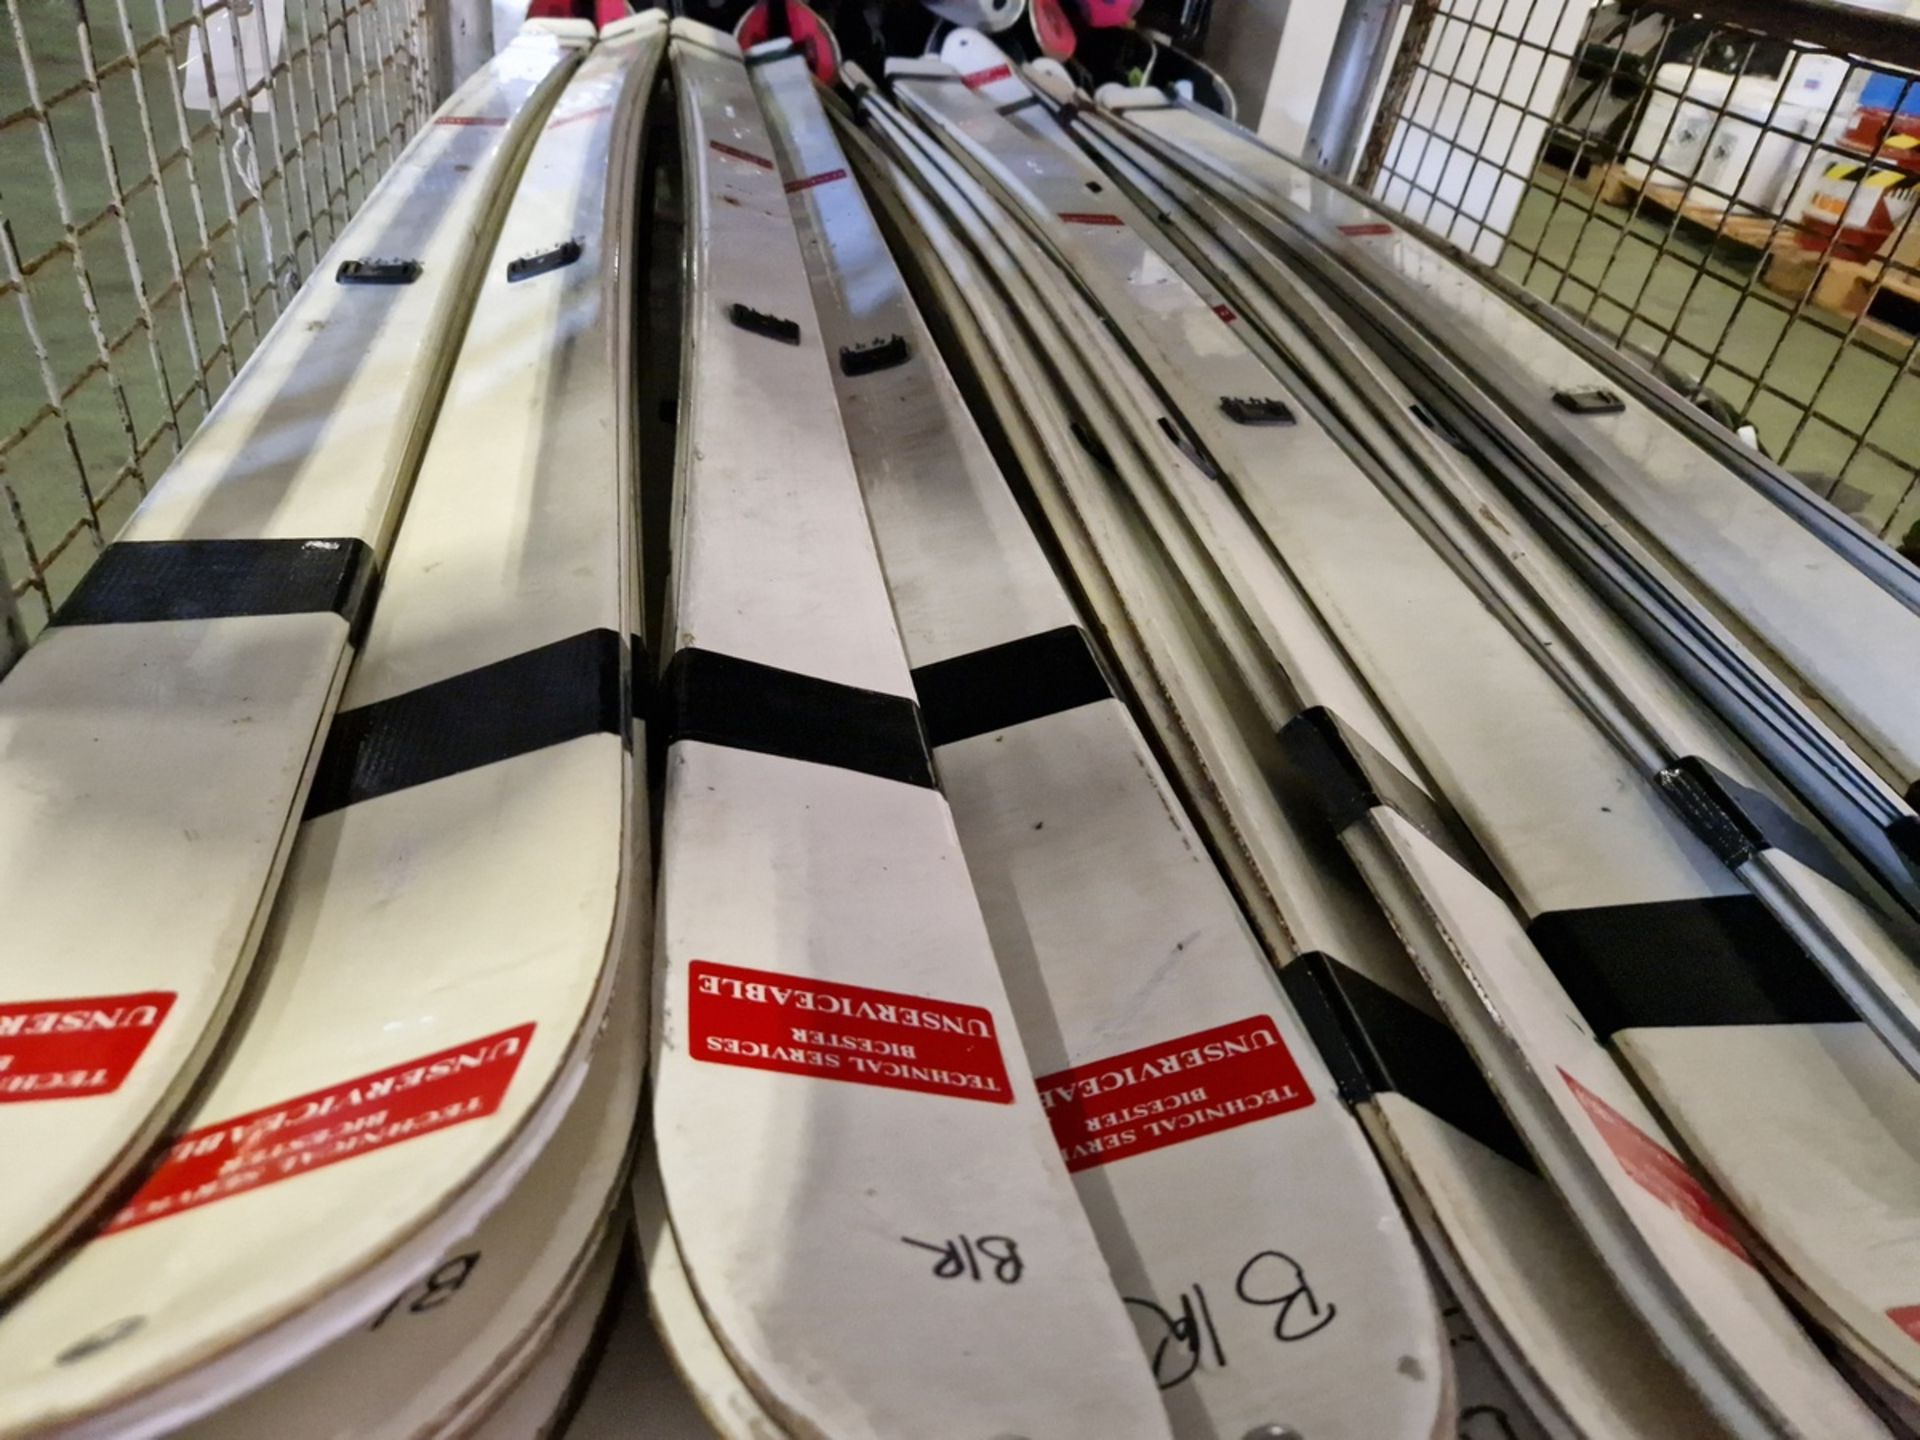 White nordic combat skis - no clamps - approx. 145 pairs, Fischer skis - no clamps - 20 pairs - Image 9 of 9